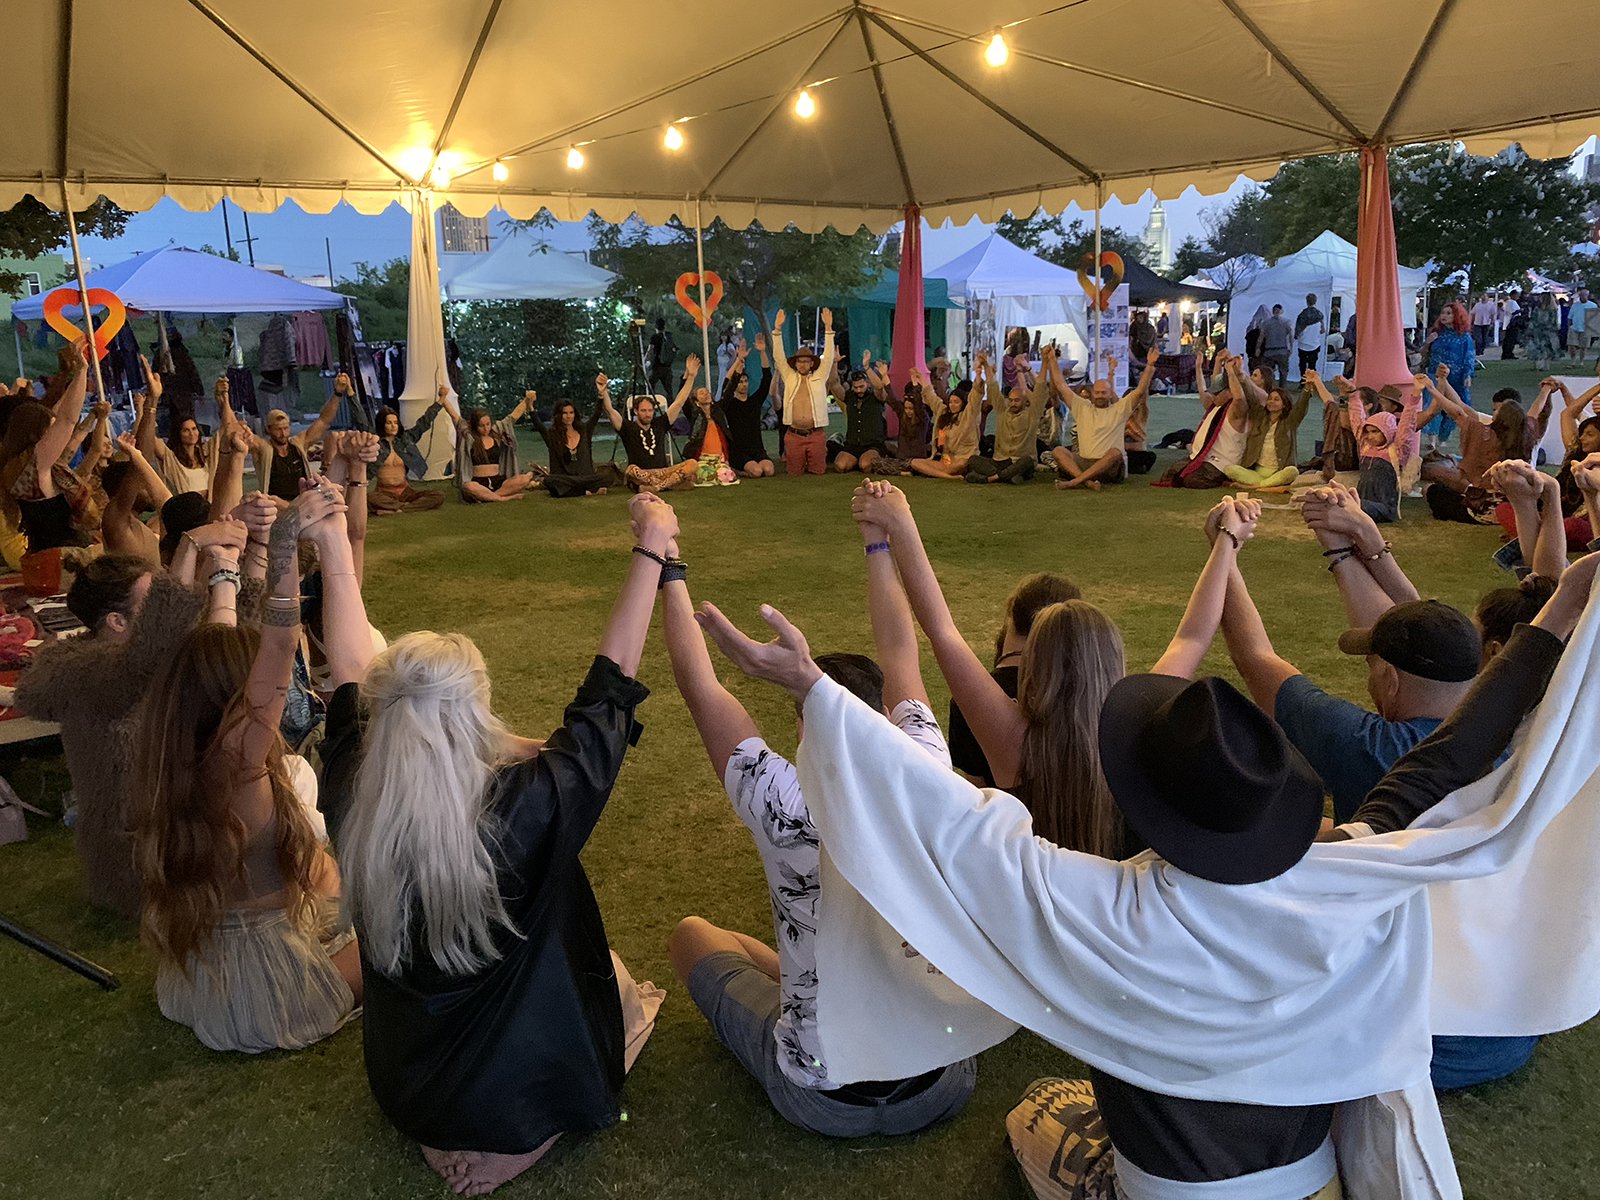 Attendees hold hands for a closing prayer after a session of guided ecstatic dance during DisclosureFest, Saturday, June 18, 2022, at the Los Angeles State Historic Park. Photo by Sam Kestenbaum